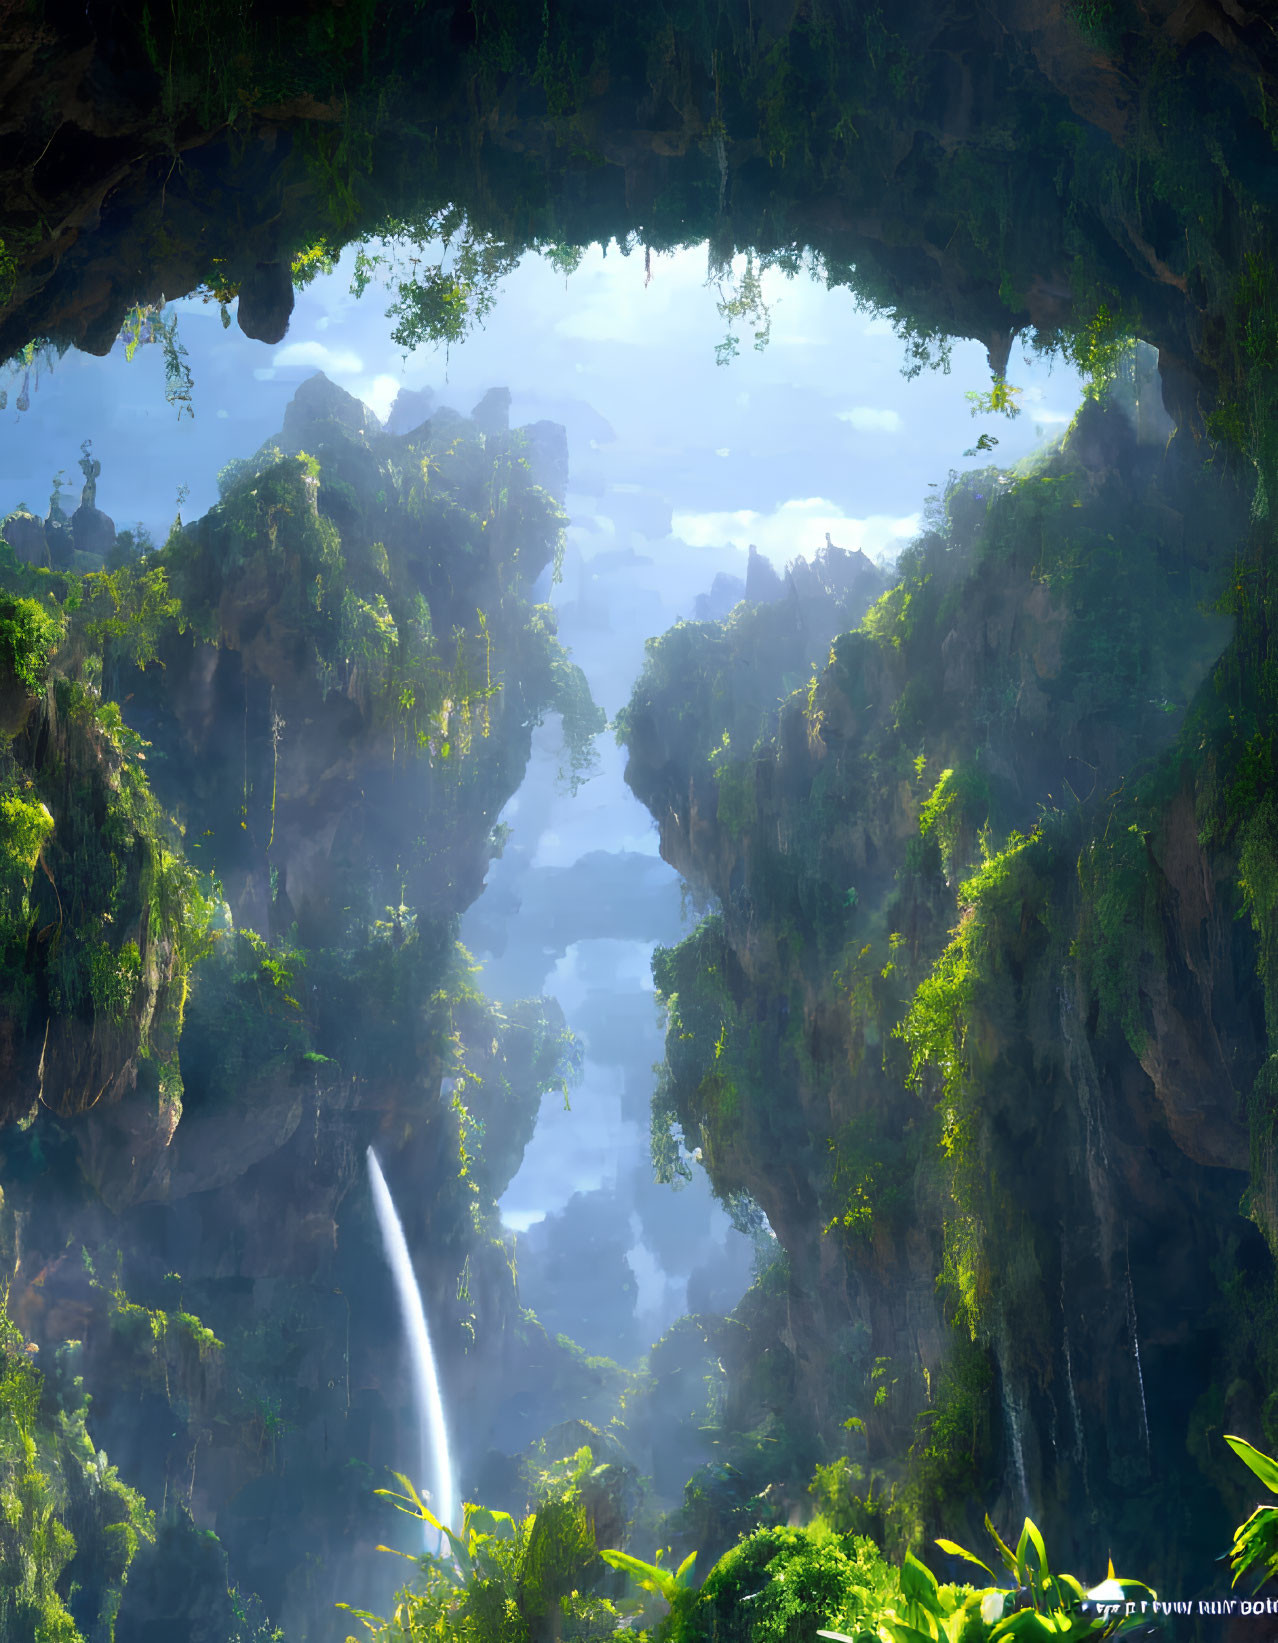 Verdant gorge with waterfalls and misty cliffs in serene landscape